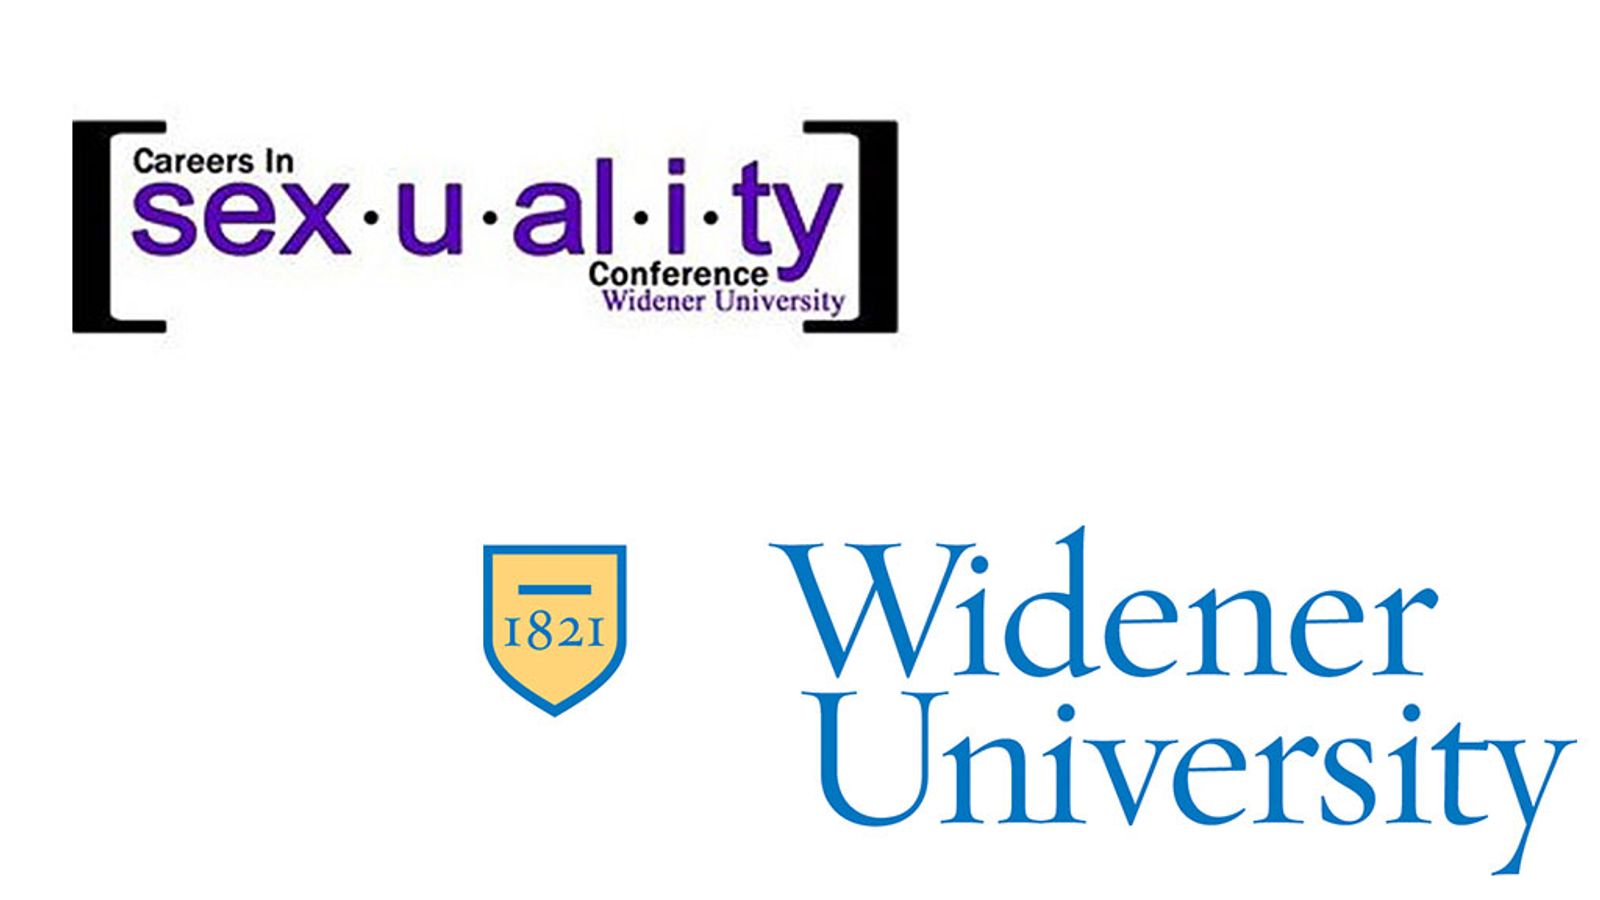 Aneros Sponsors Careers In Sexuality Conference At Widener Univ.